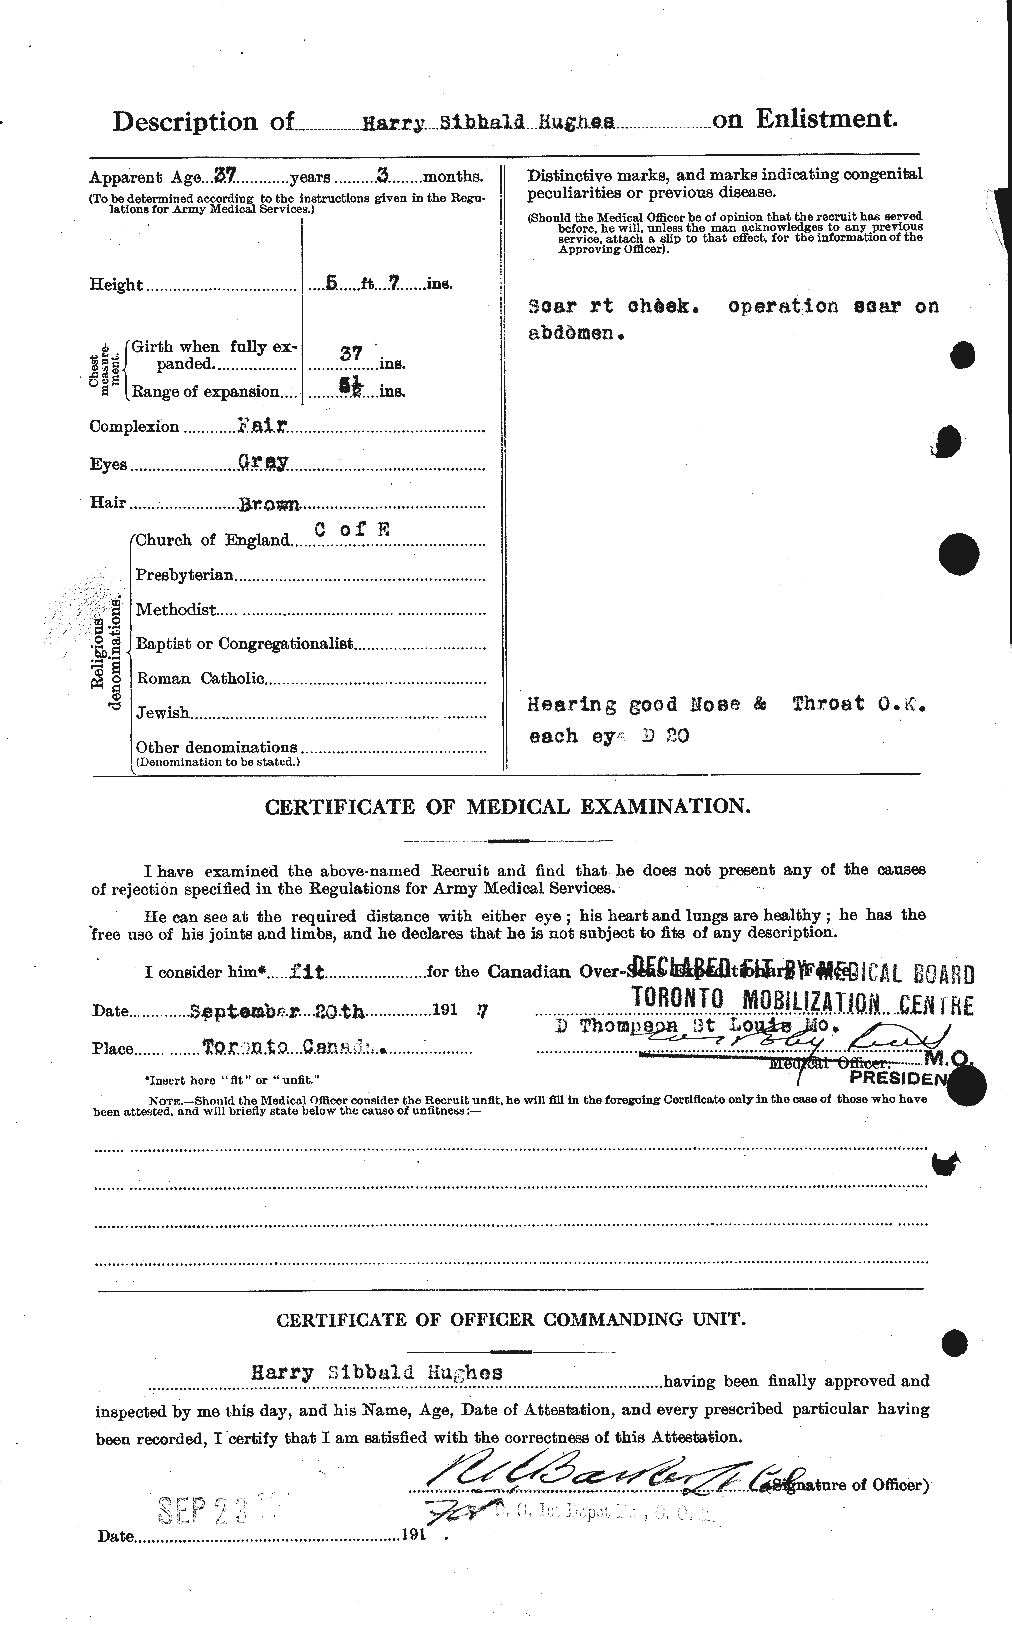 Personnel Records of the First World War - CEF 403876b